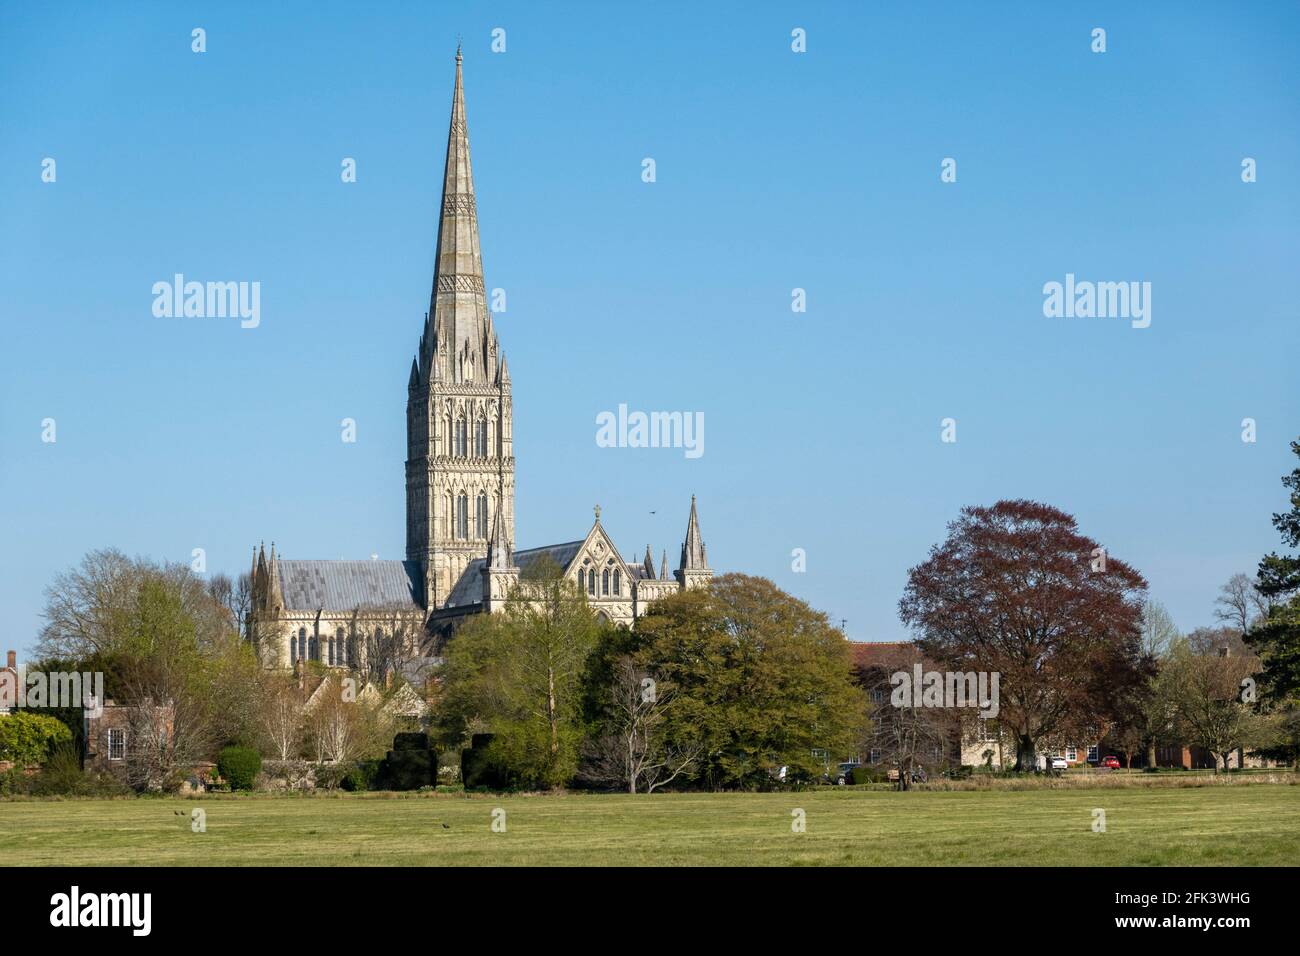 Salisbury, Wiltshire, England, UK. 2021.  The famous Salisbury Cathedral viewed across the watermeadows area of the city. Stock Photo